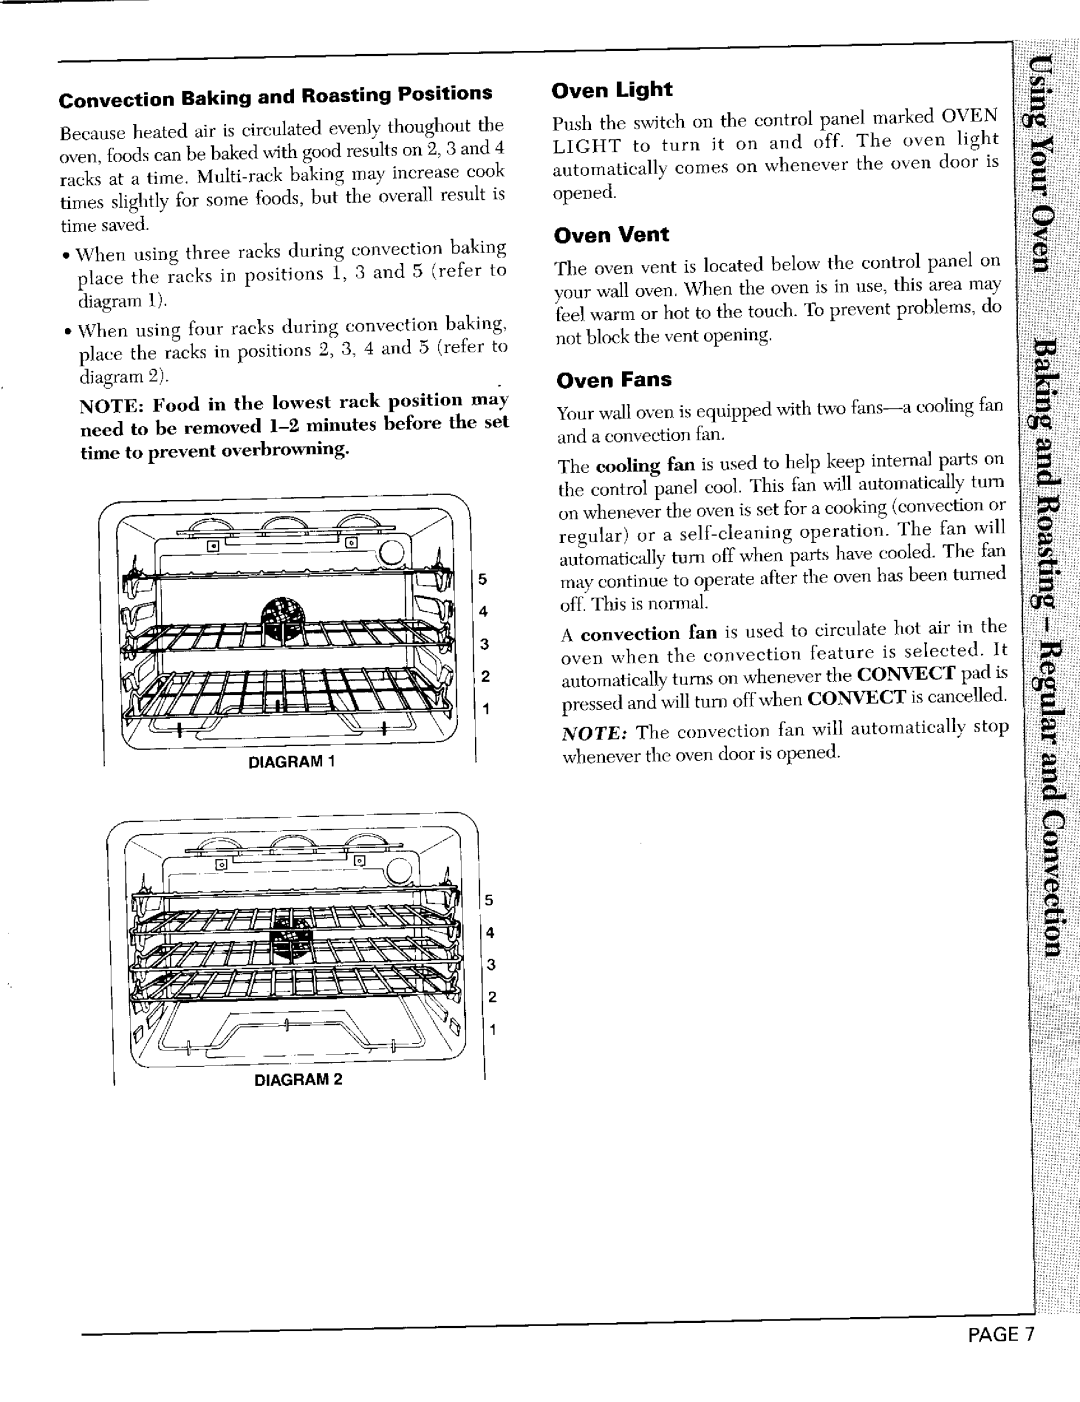 Maytag CWE9030B, CWE9030D Convection Baking and Roasting Positions, DIAGRAM1, Oven Light, Oven Vent, Oven Fans 